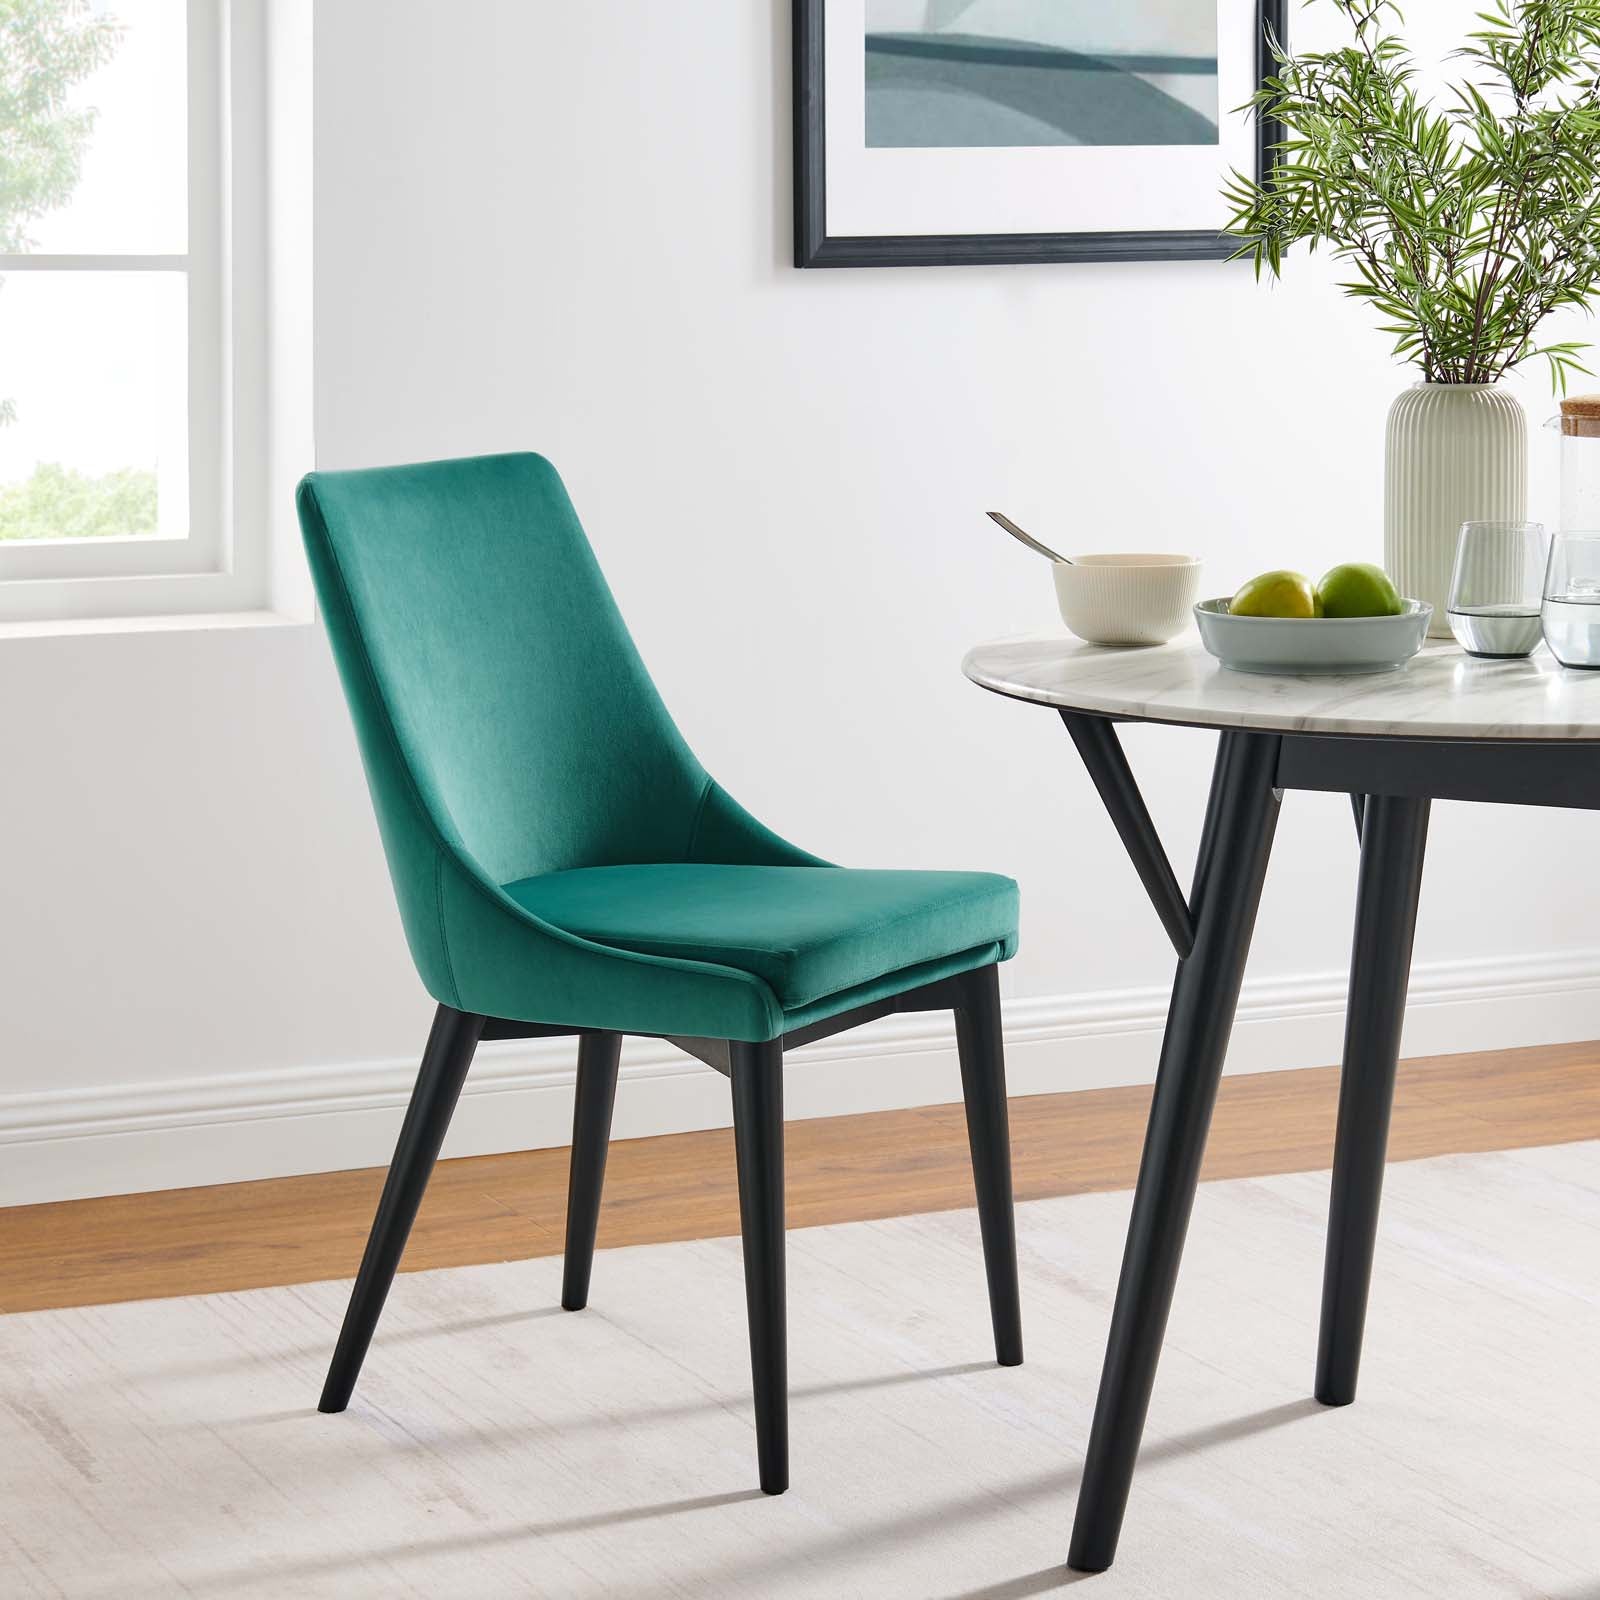 Modway Dining Chairs - Viscount Performance Velvet Dining Chair Teal